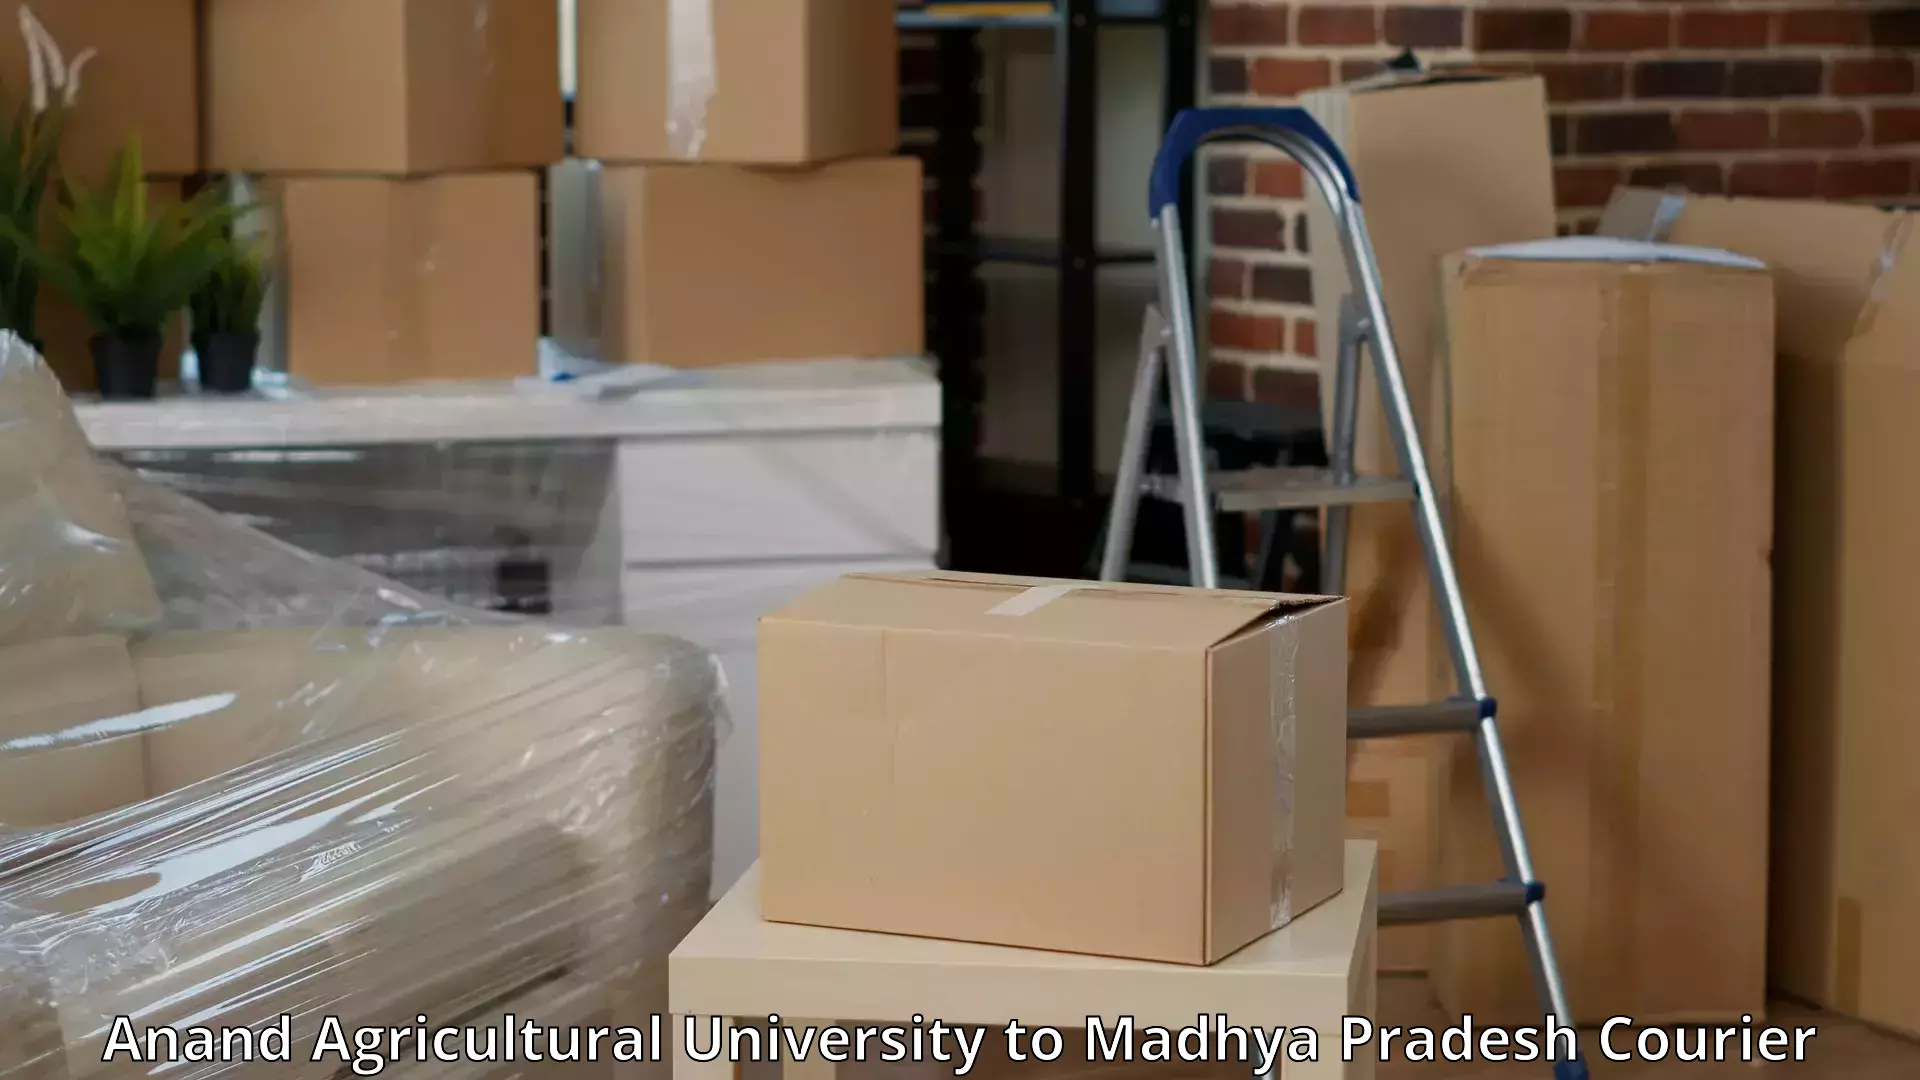 Efficient furniture relocation Anand Agricultural University to Rampur Naikin